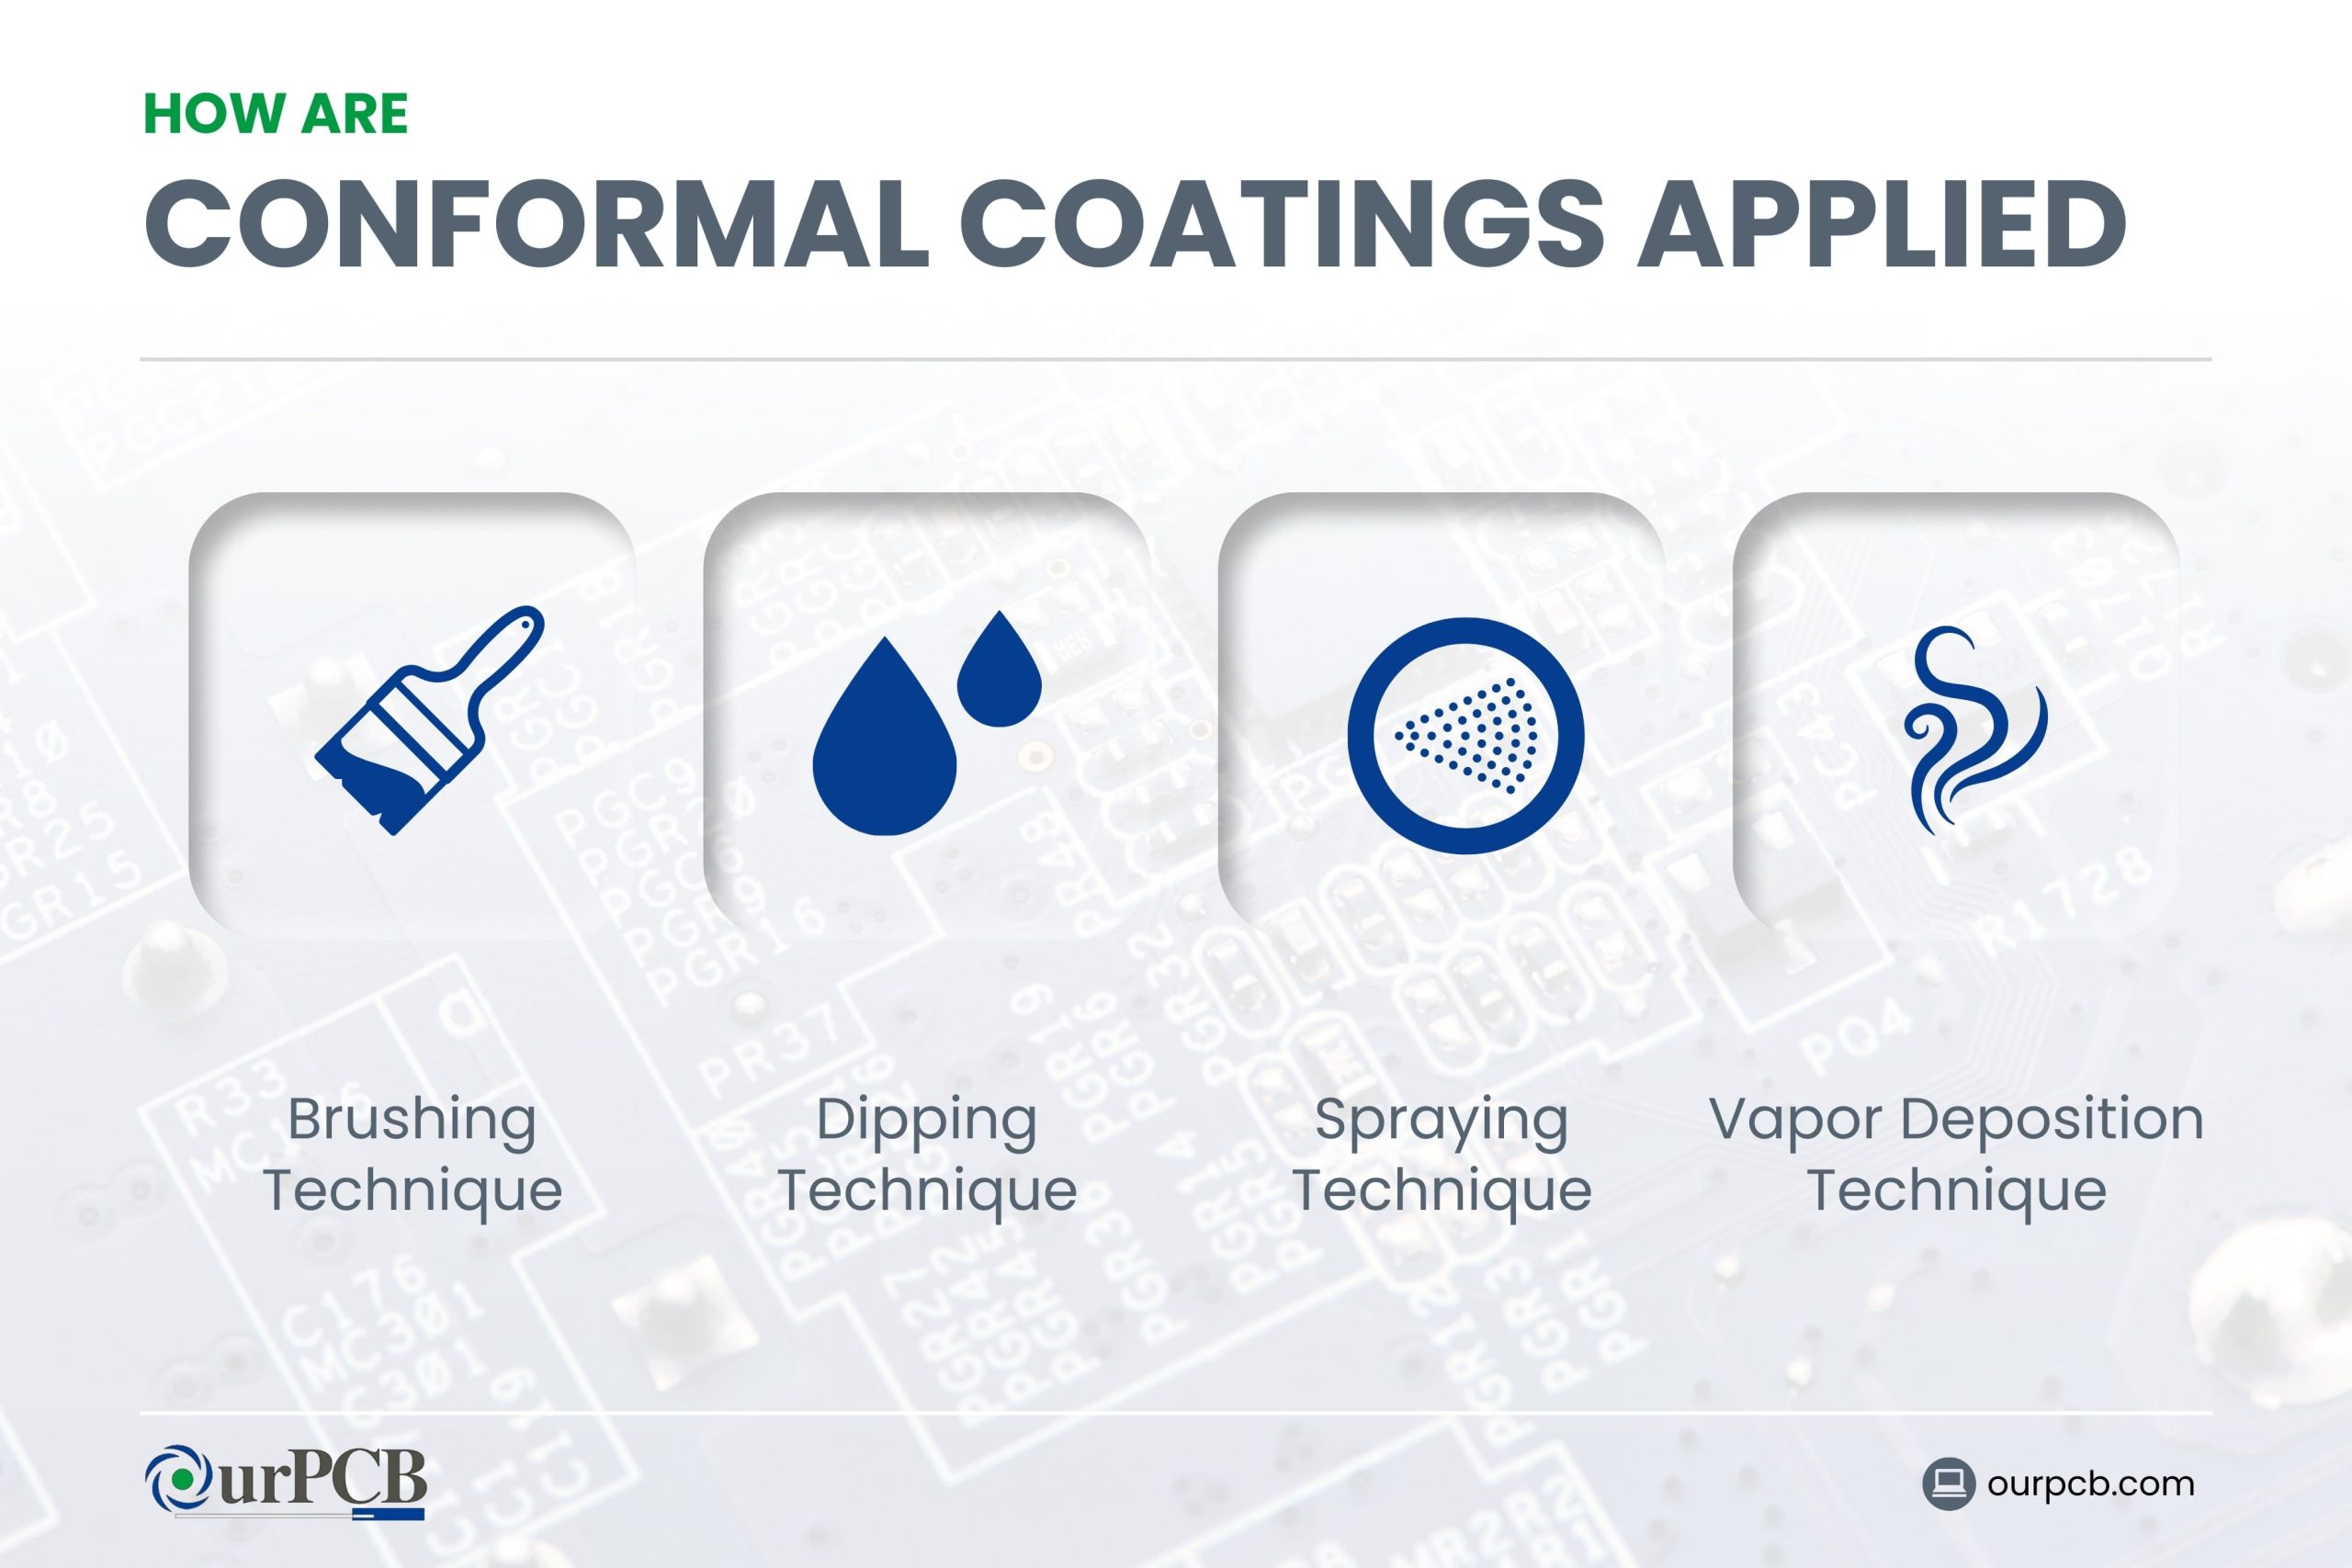 How are Conformal Coatings Applied